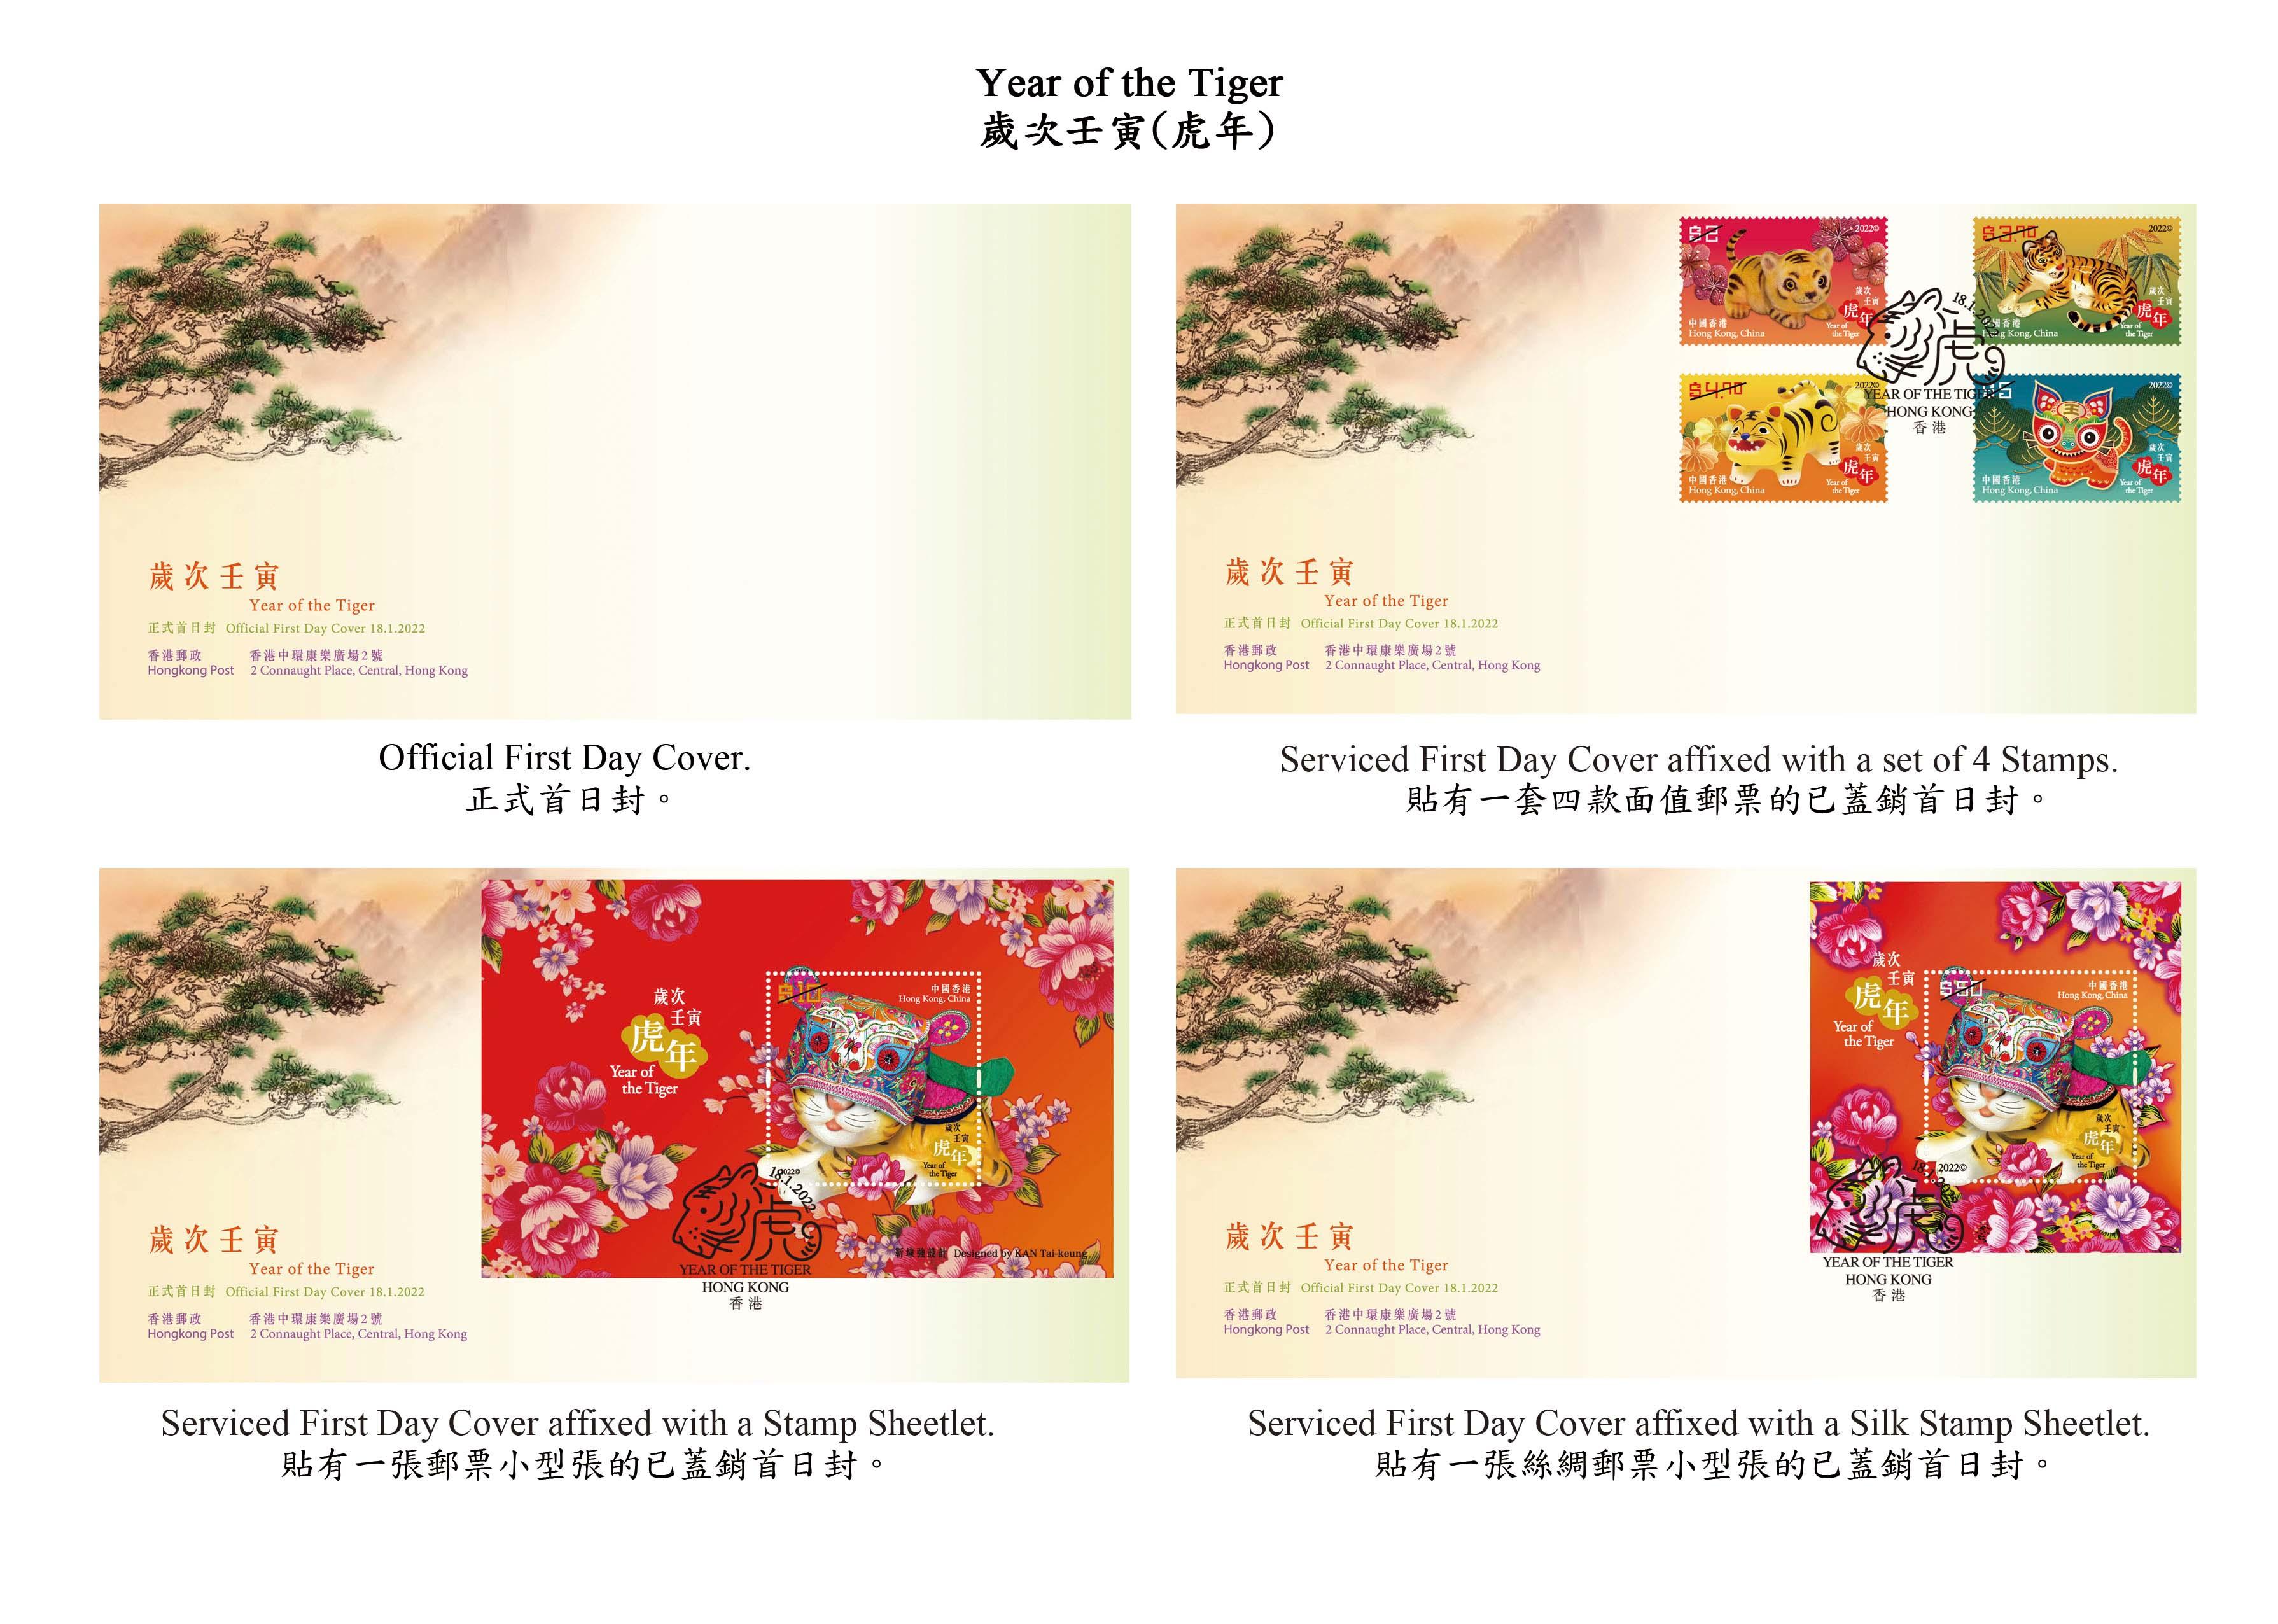 Hongkong Post will launch a special stamp issue and associated philatelic products with the theme "Year of the Tiger" on January 18 (Tuesday). Photo shows the first day covers.

